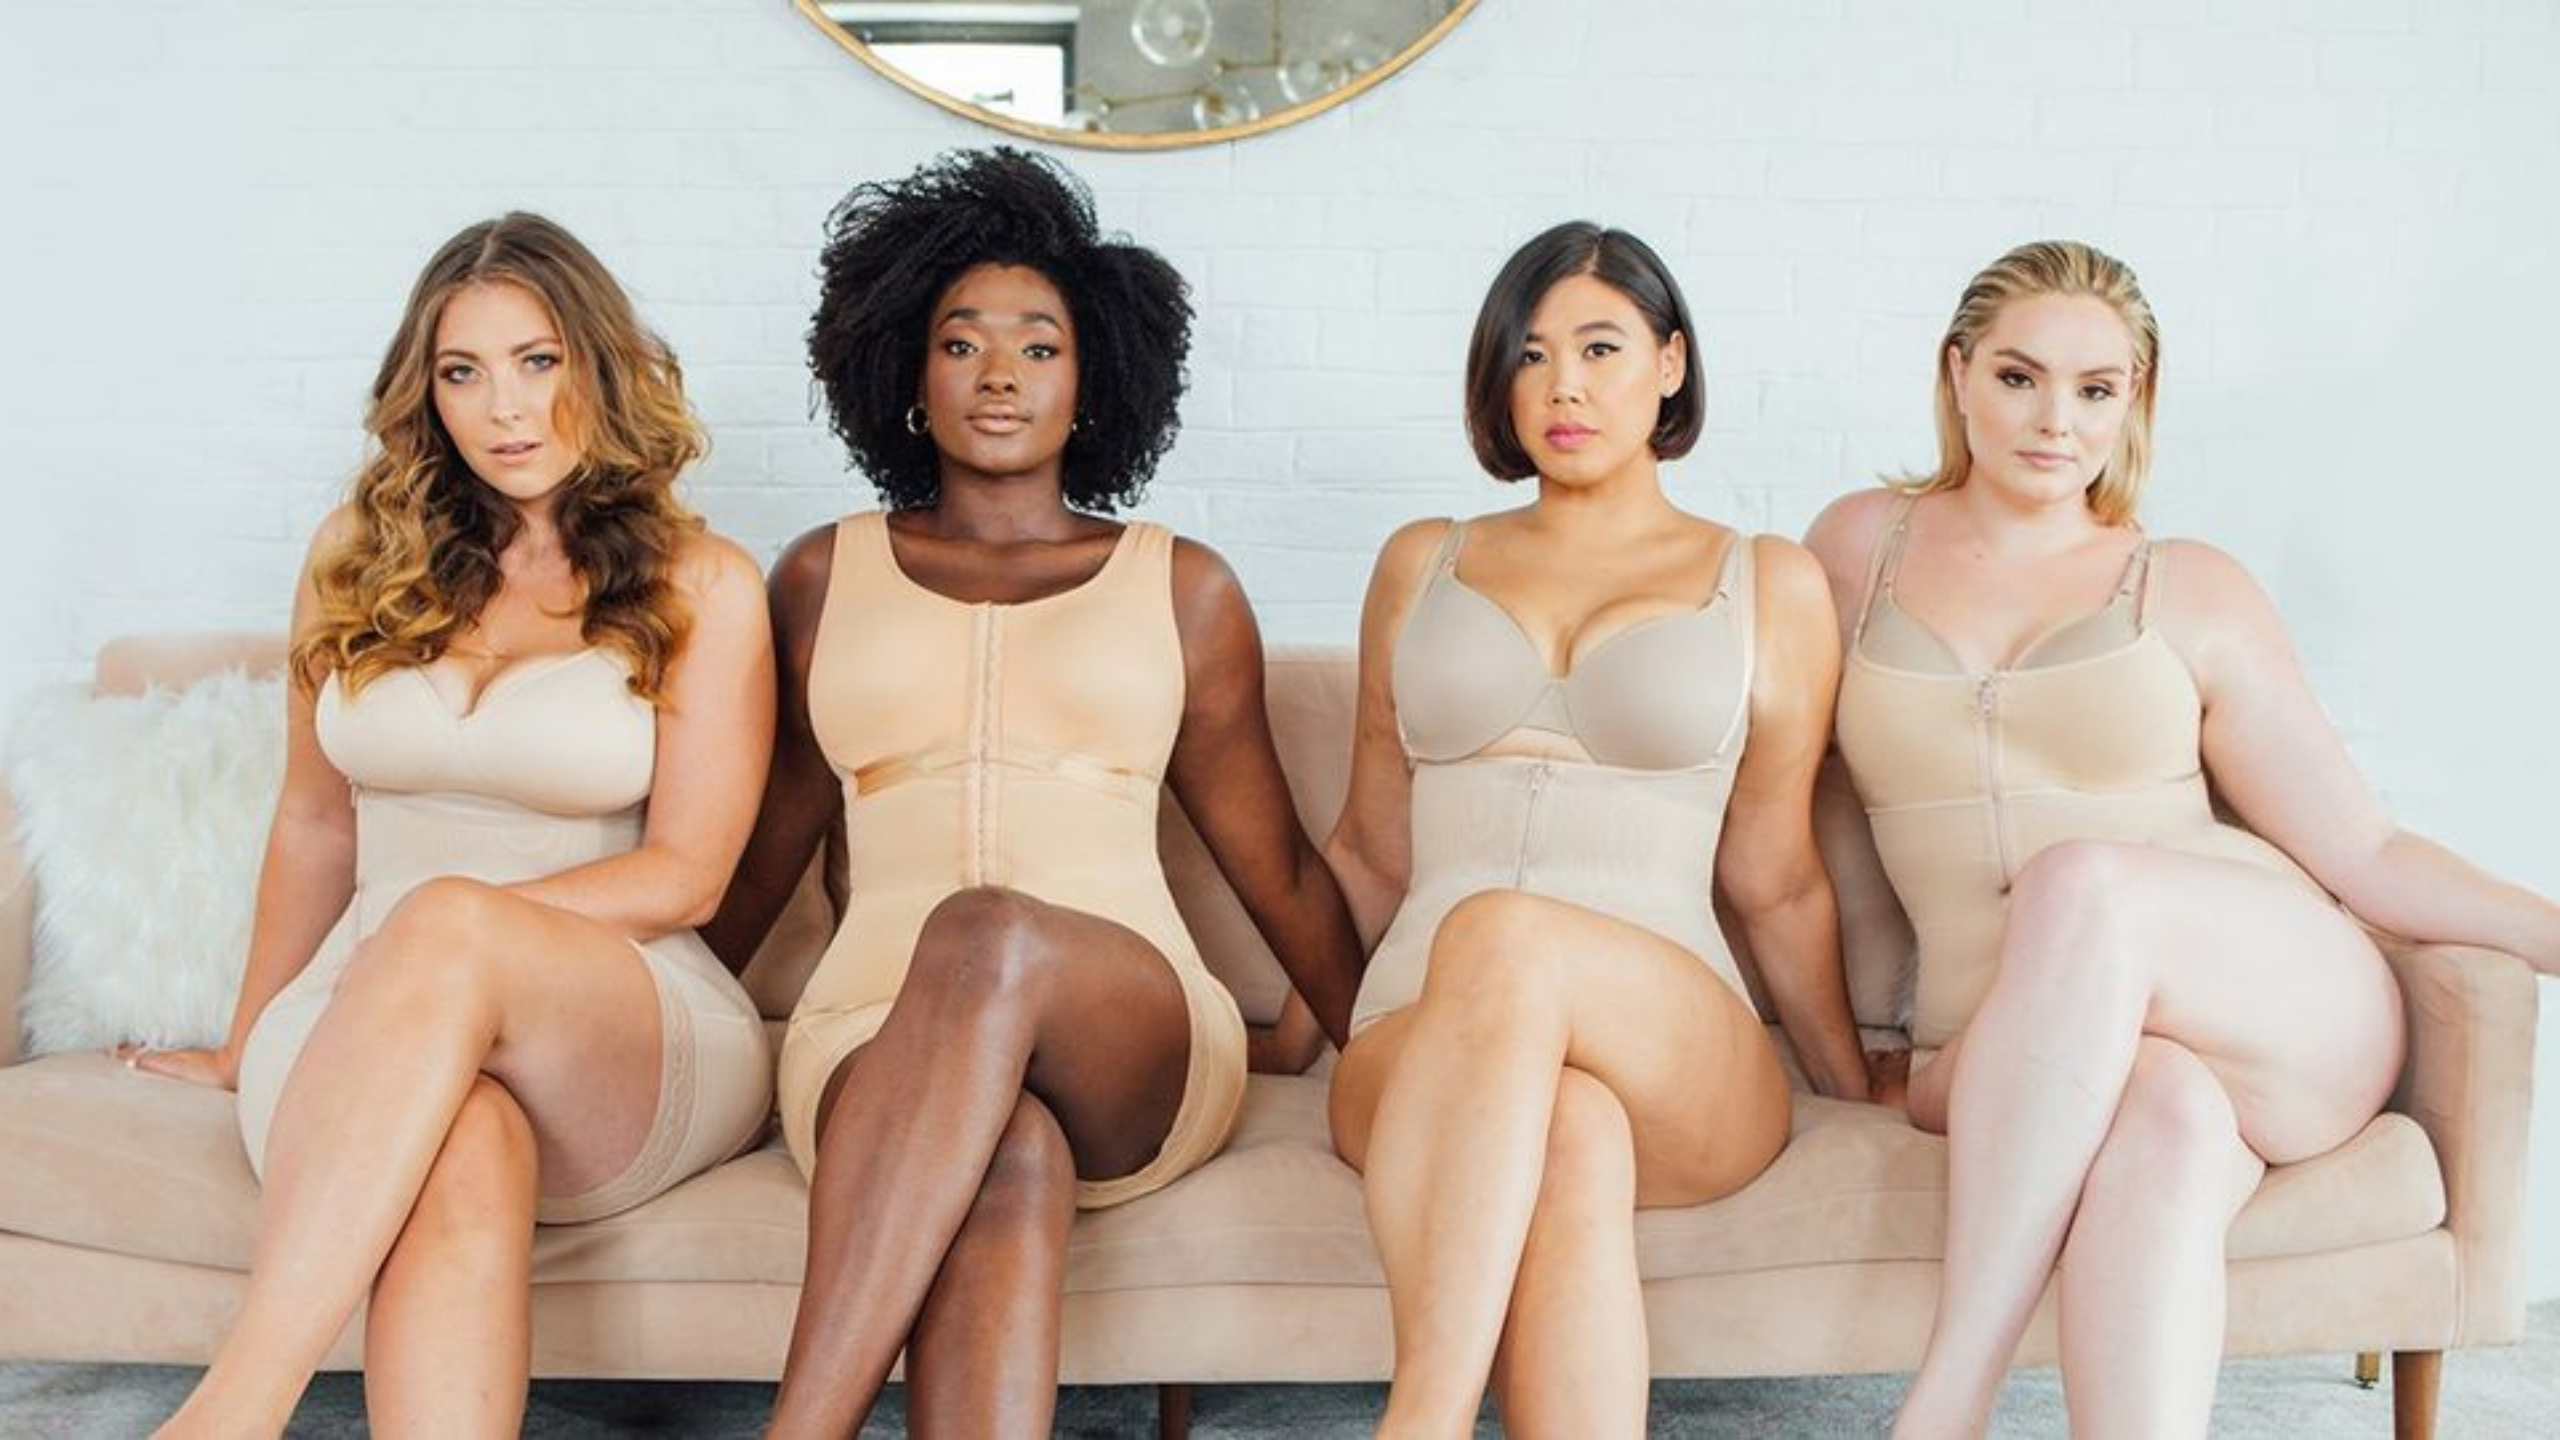 Our shapewear is all the support you will need. Available in size